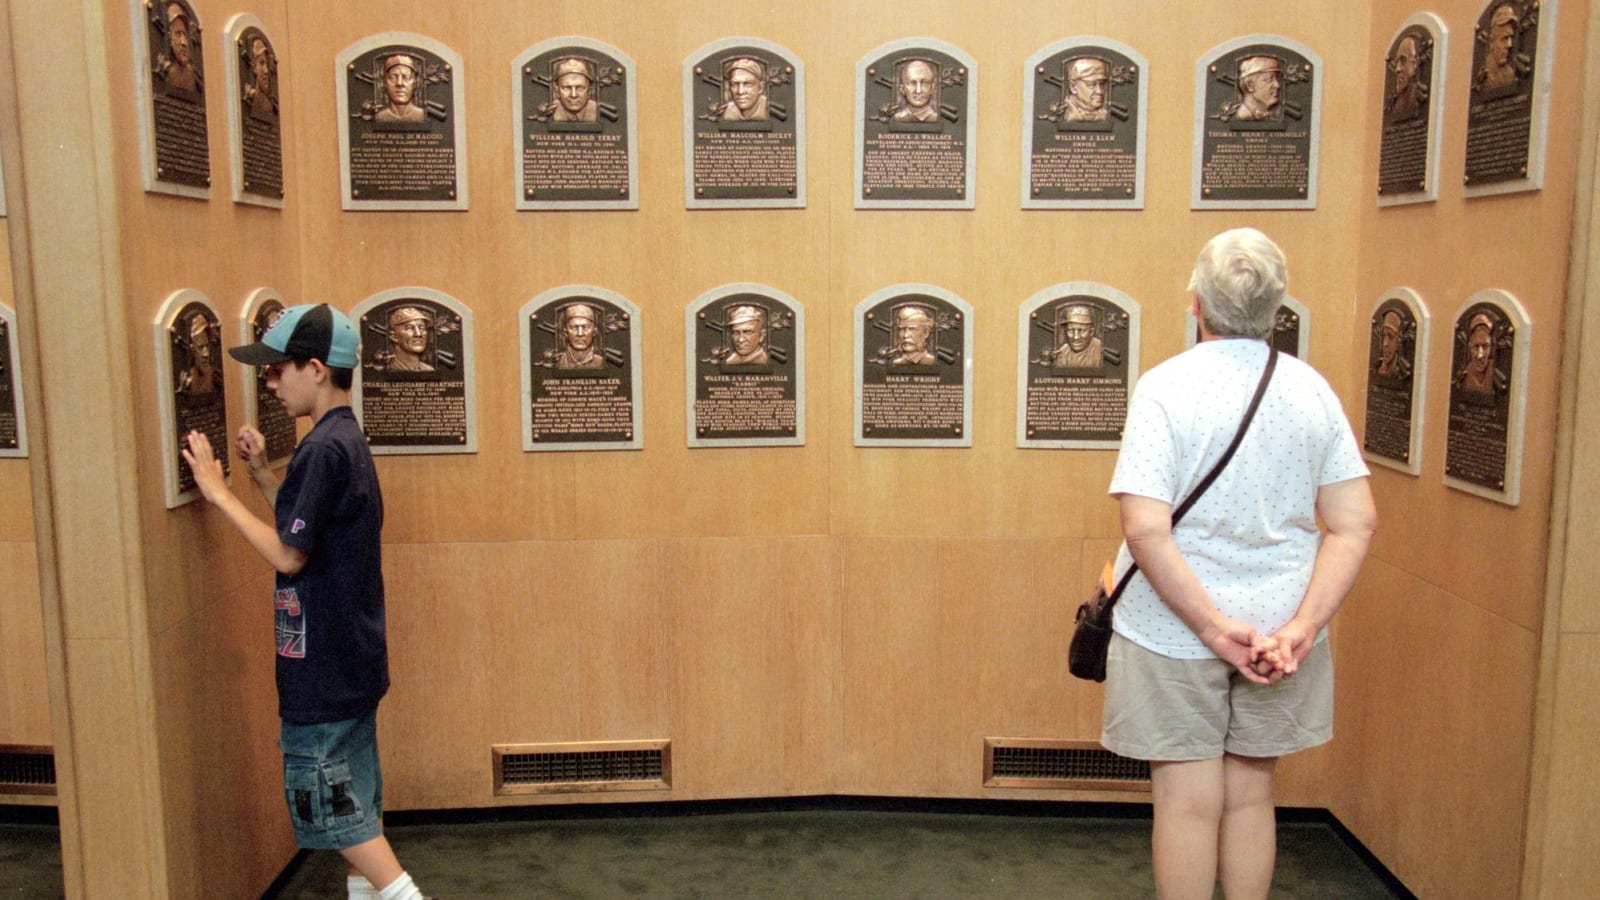 The best player from every MLB franchise who is not in the Hall of Fame